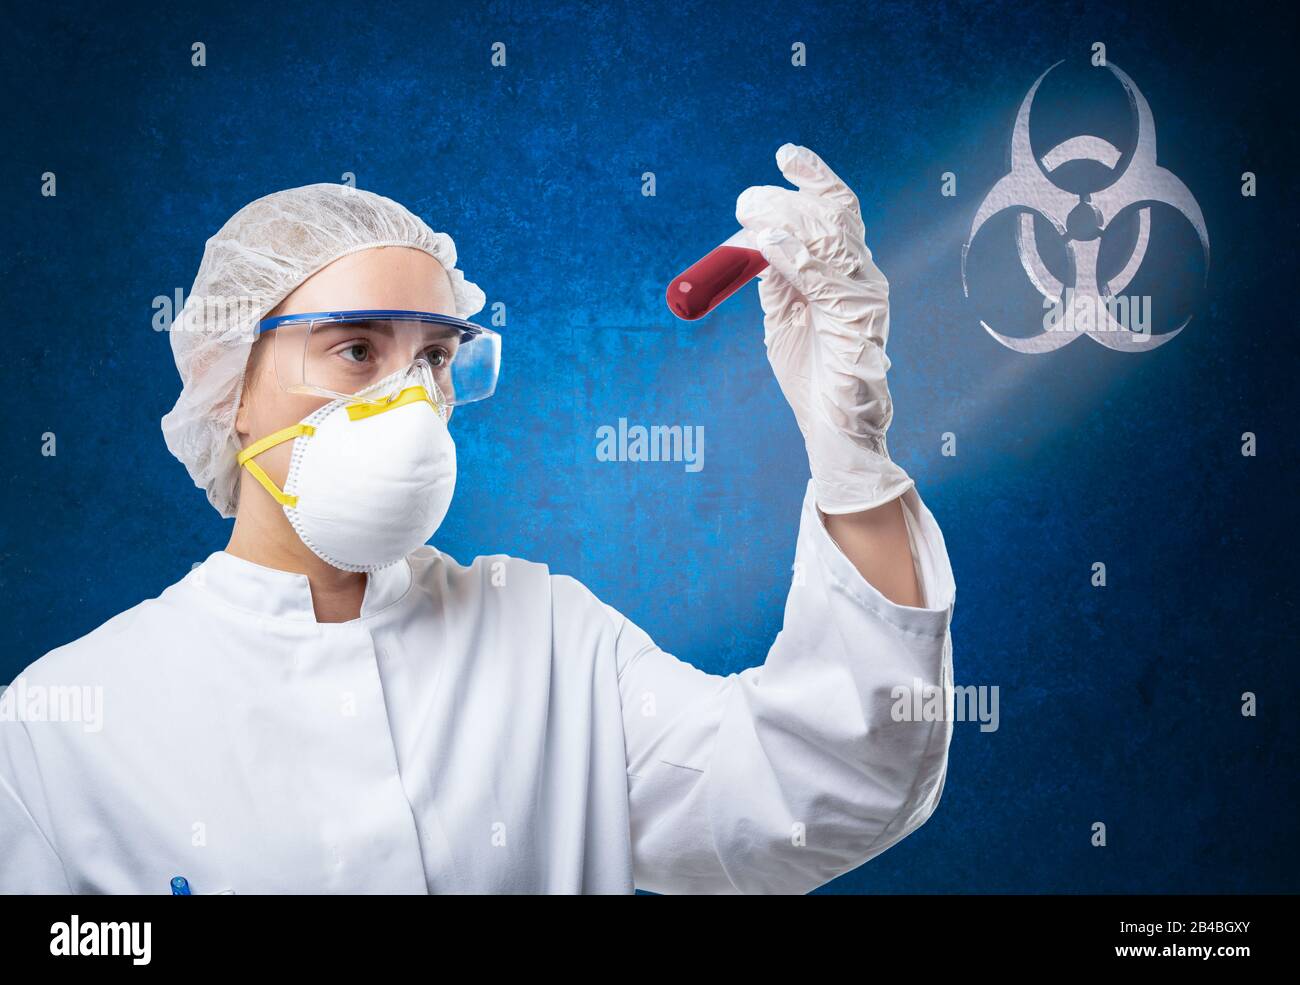 concept image about the biological hazard of viruses Stock Photo